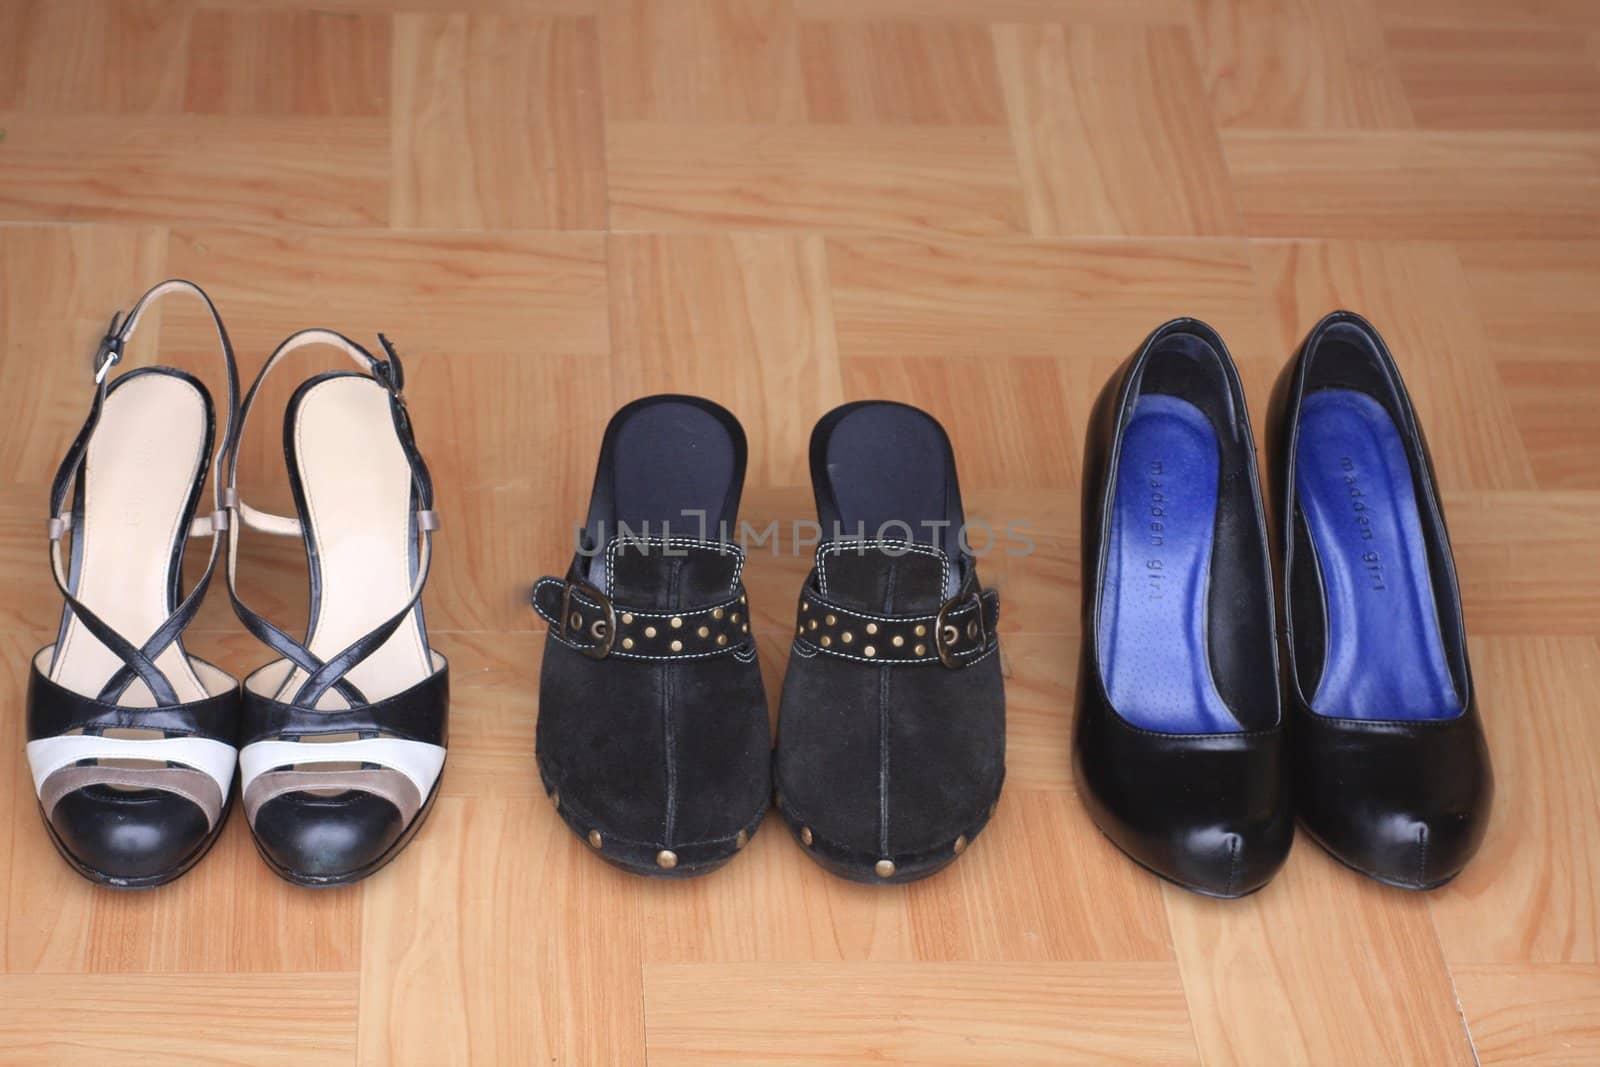 Three pairs of black women’s shoes lined up on wood floor by door. Attractive women’s foot wear for fashion, home and shopping.